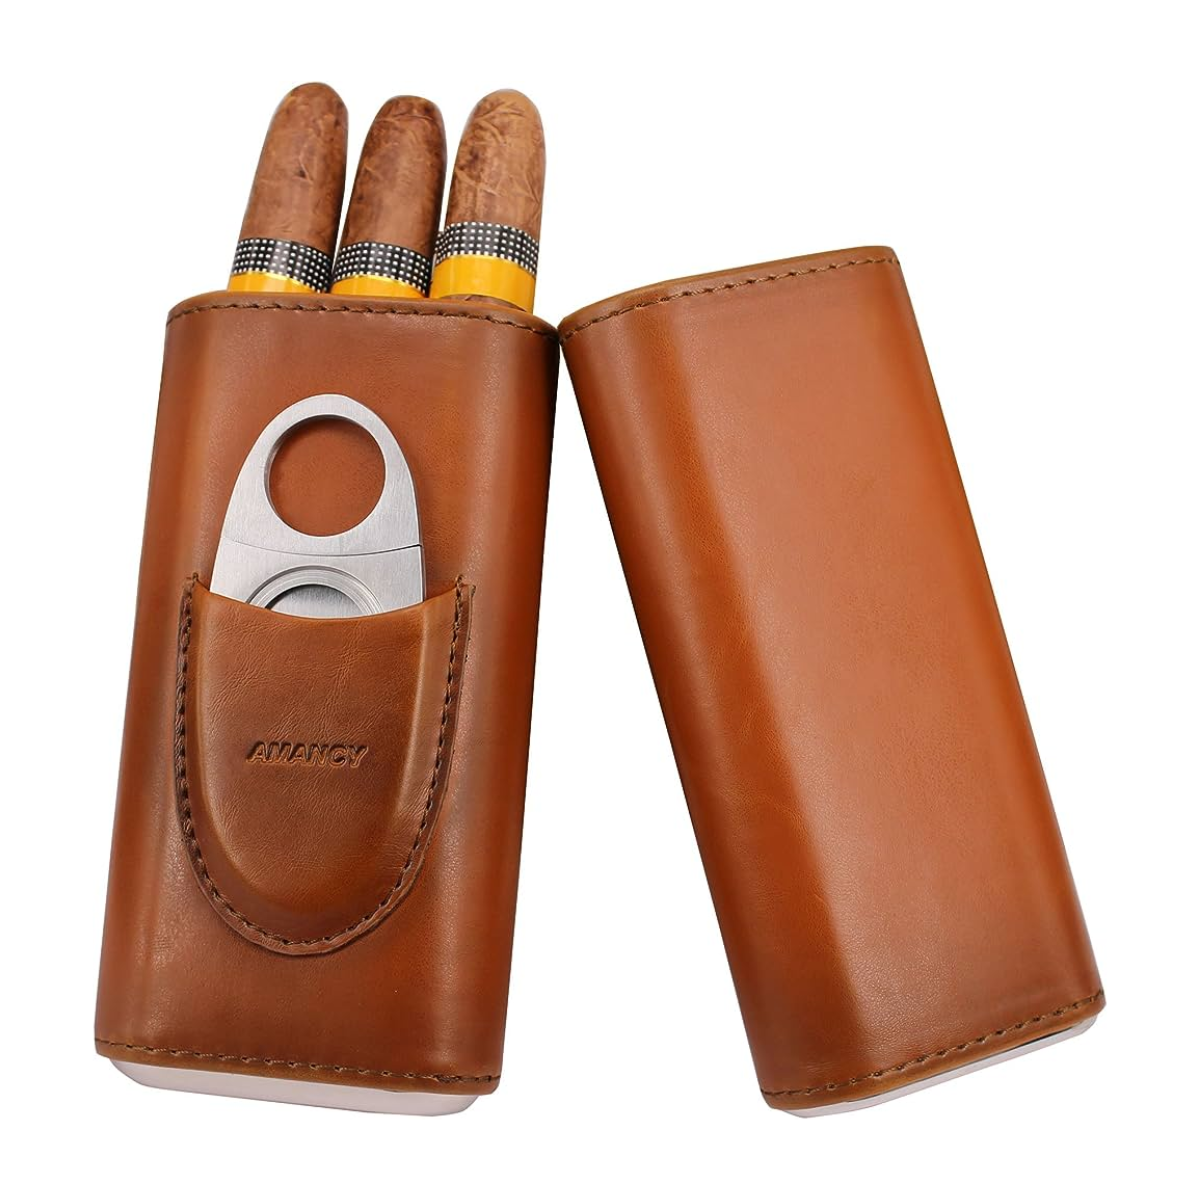 36. Classic Elegance: Leather Cigar Case - The Perfect 3rd Anniversary Gift for Him